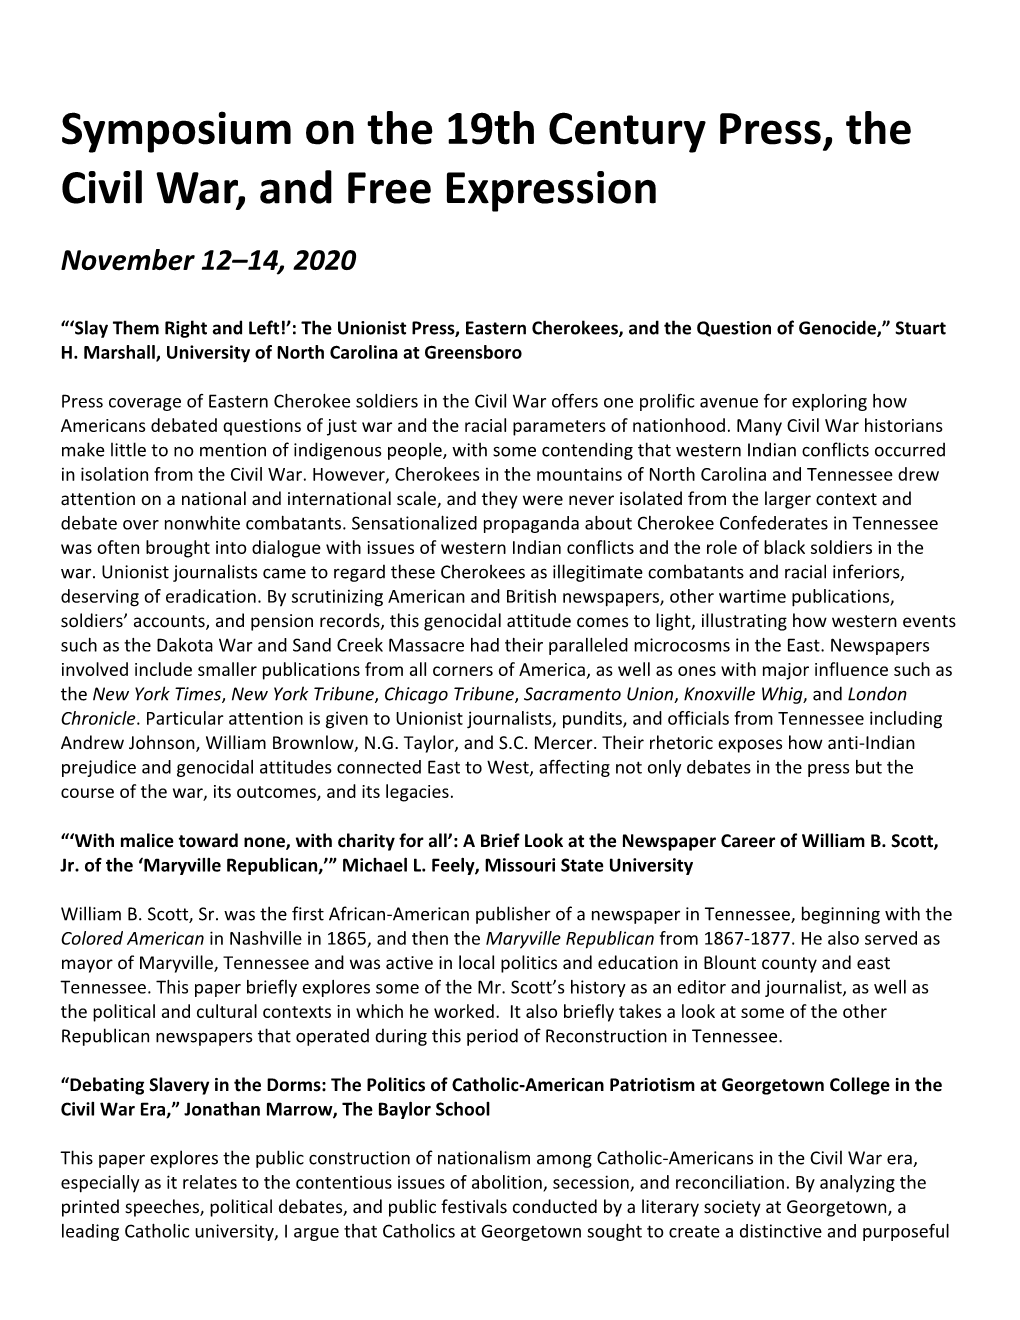 Symposium on the 19Th Century Press, the Civil War, and Free Expression